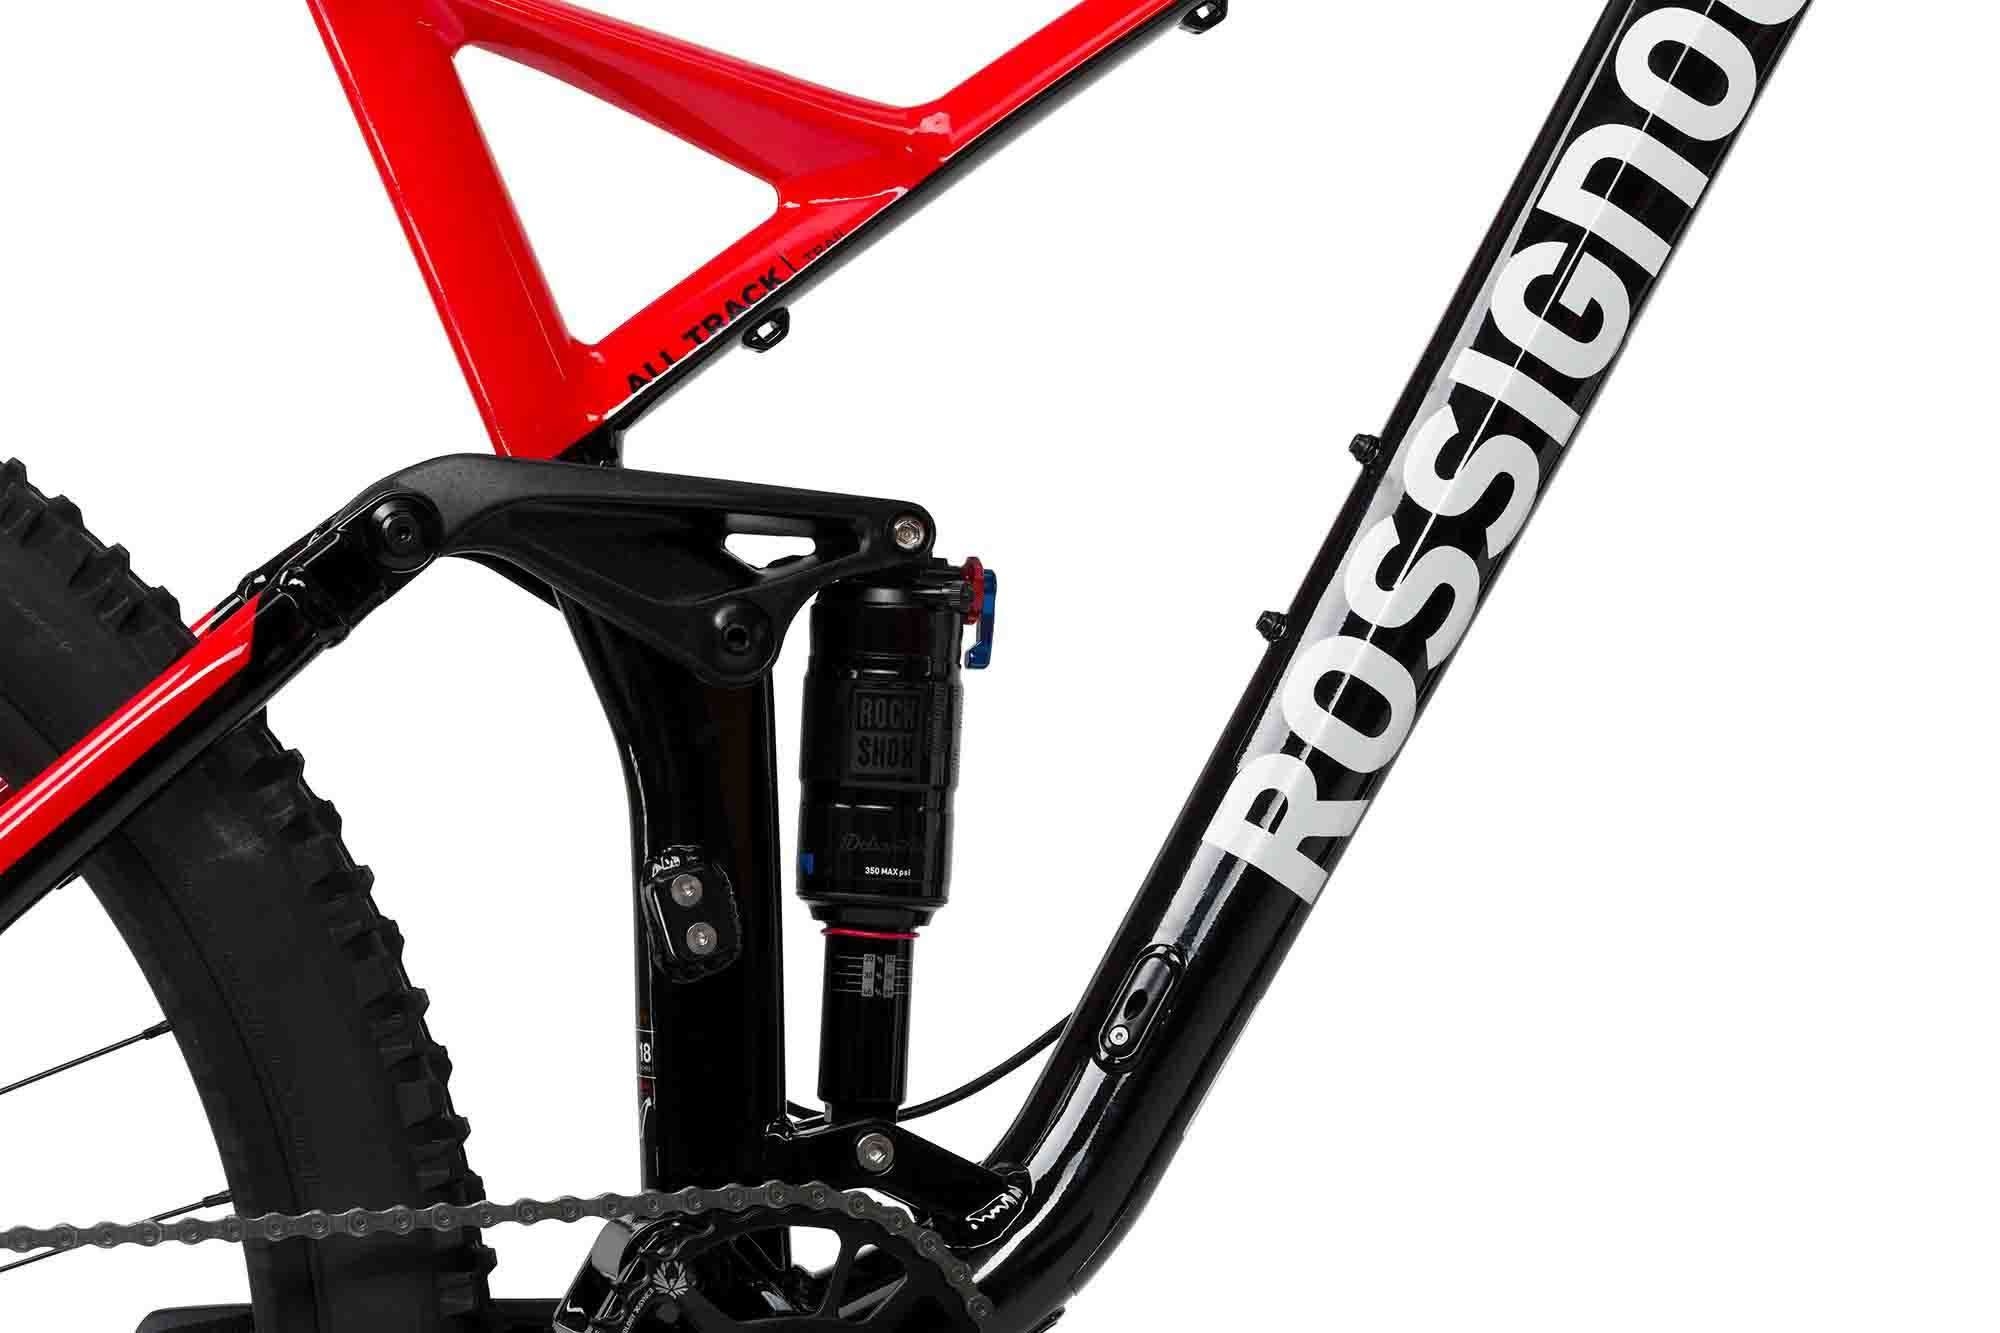 rossignol all track trail bike review